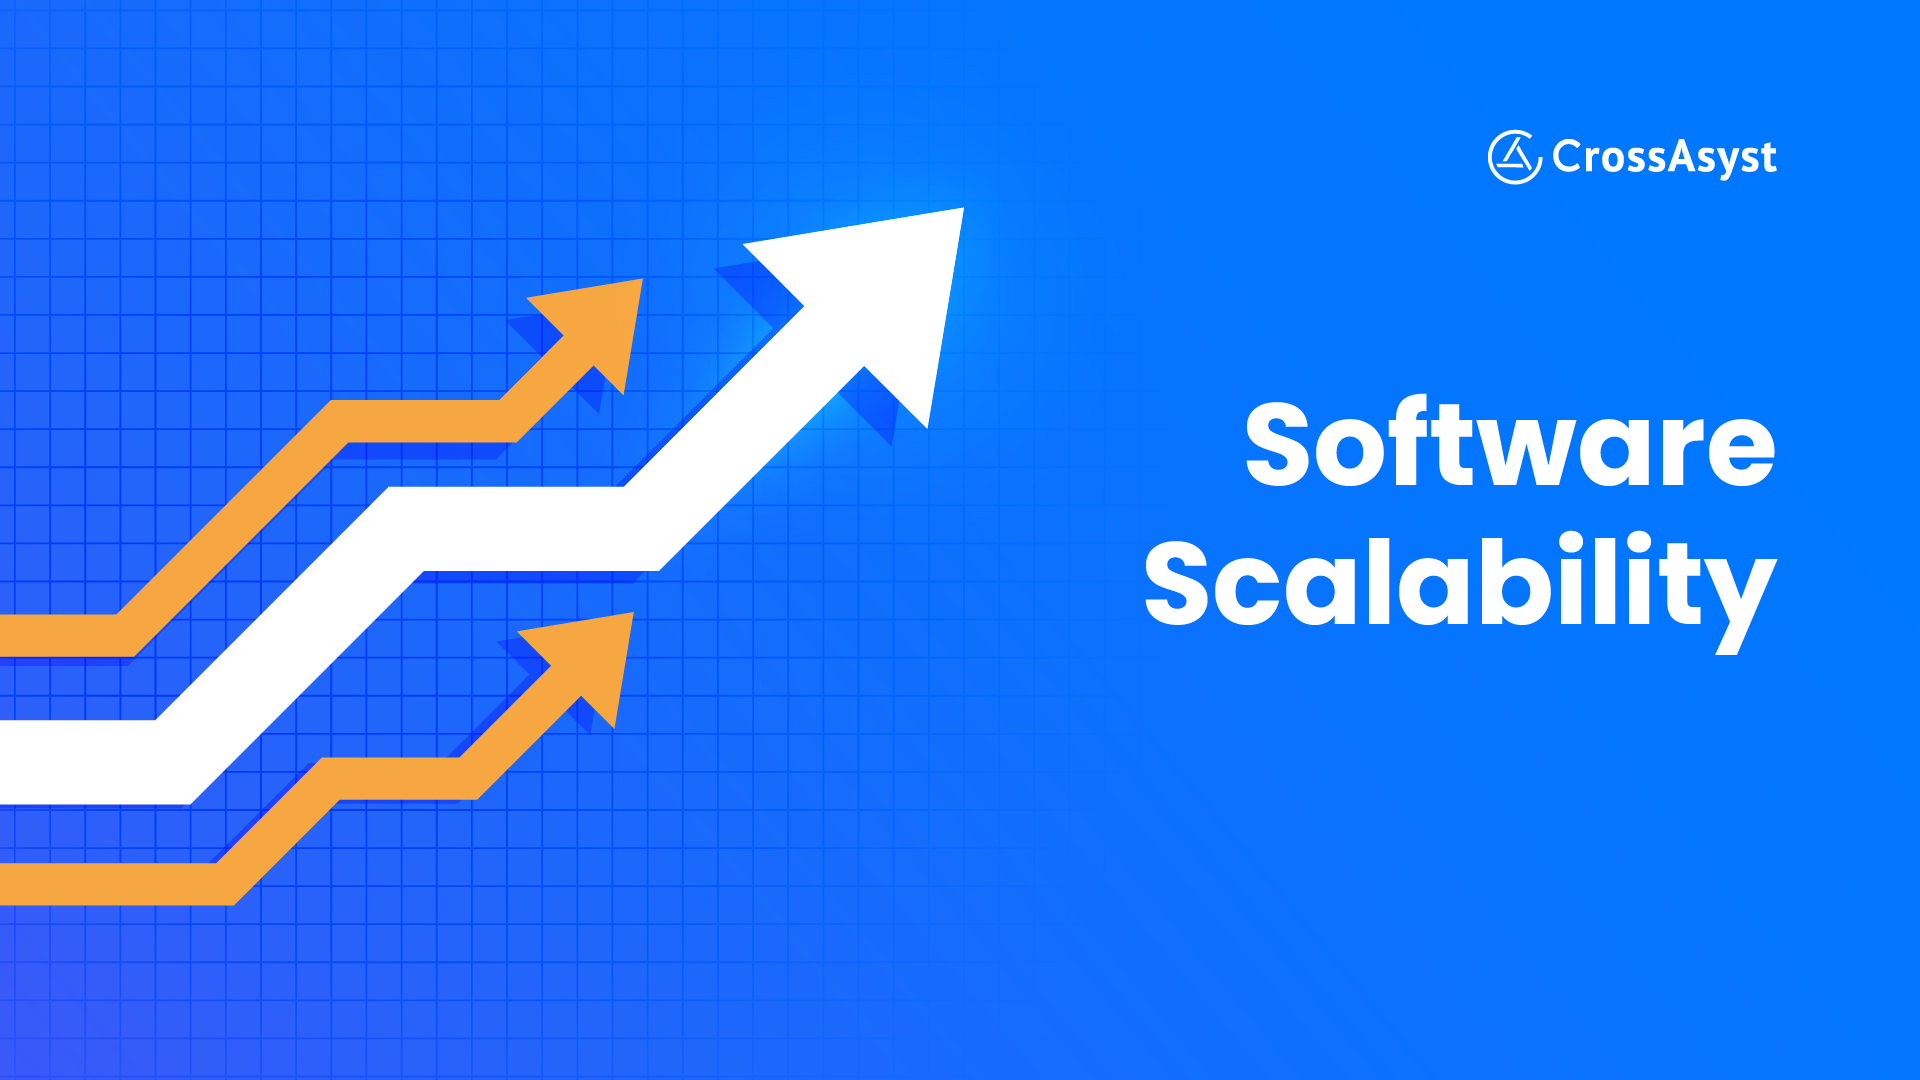 Why Software Scalability Is Important and How to Achieve It